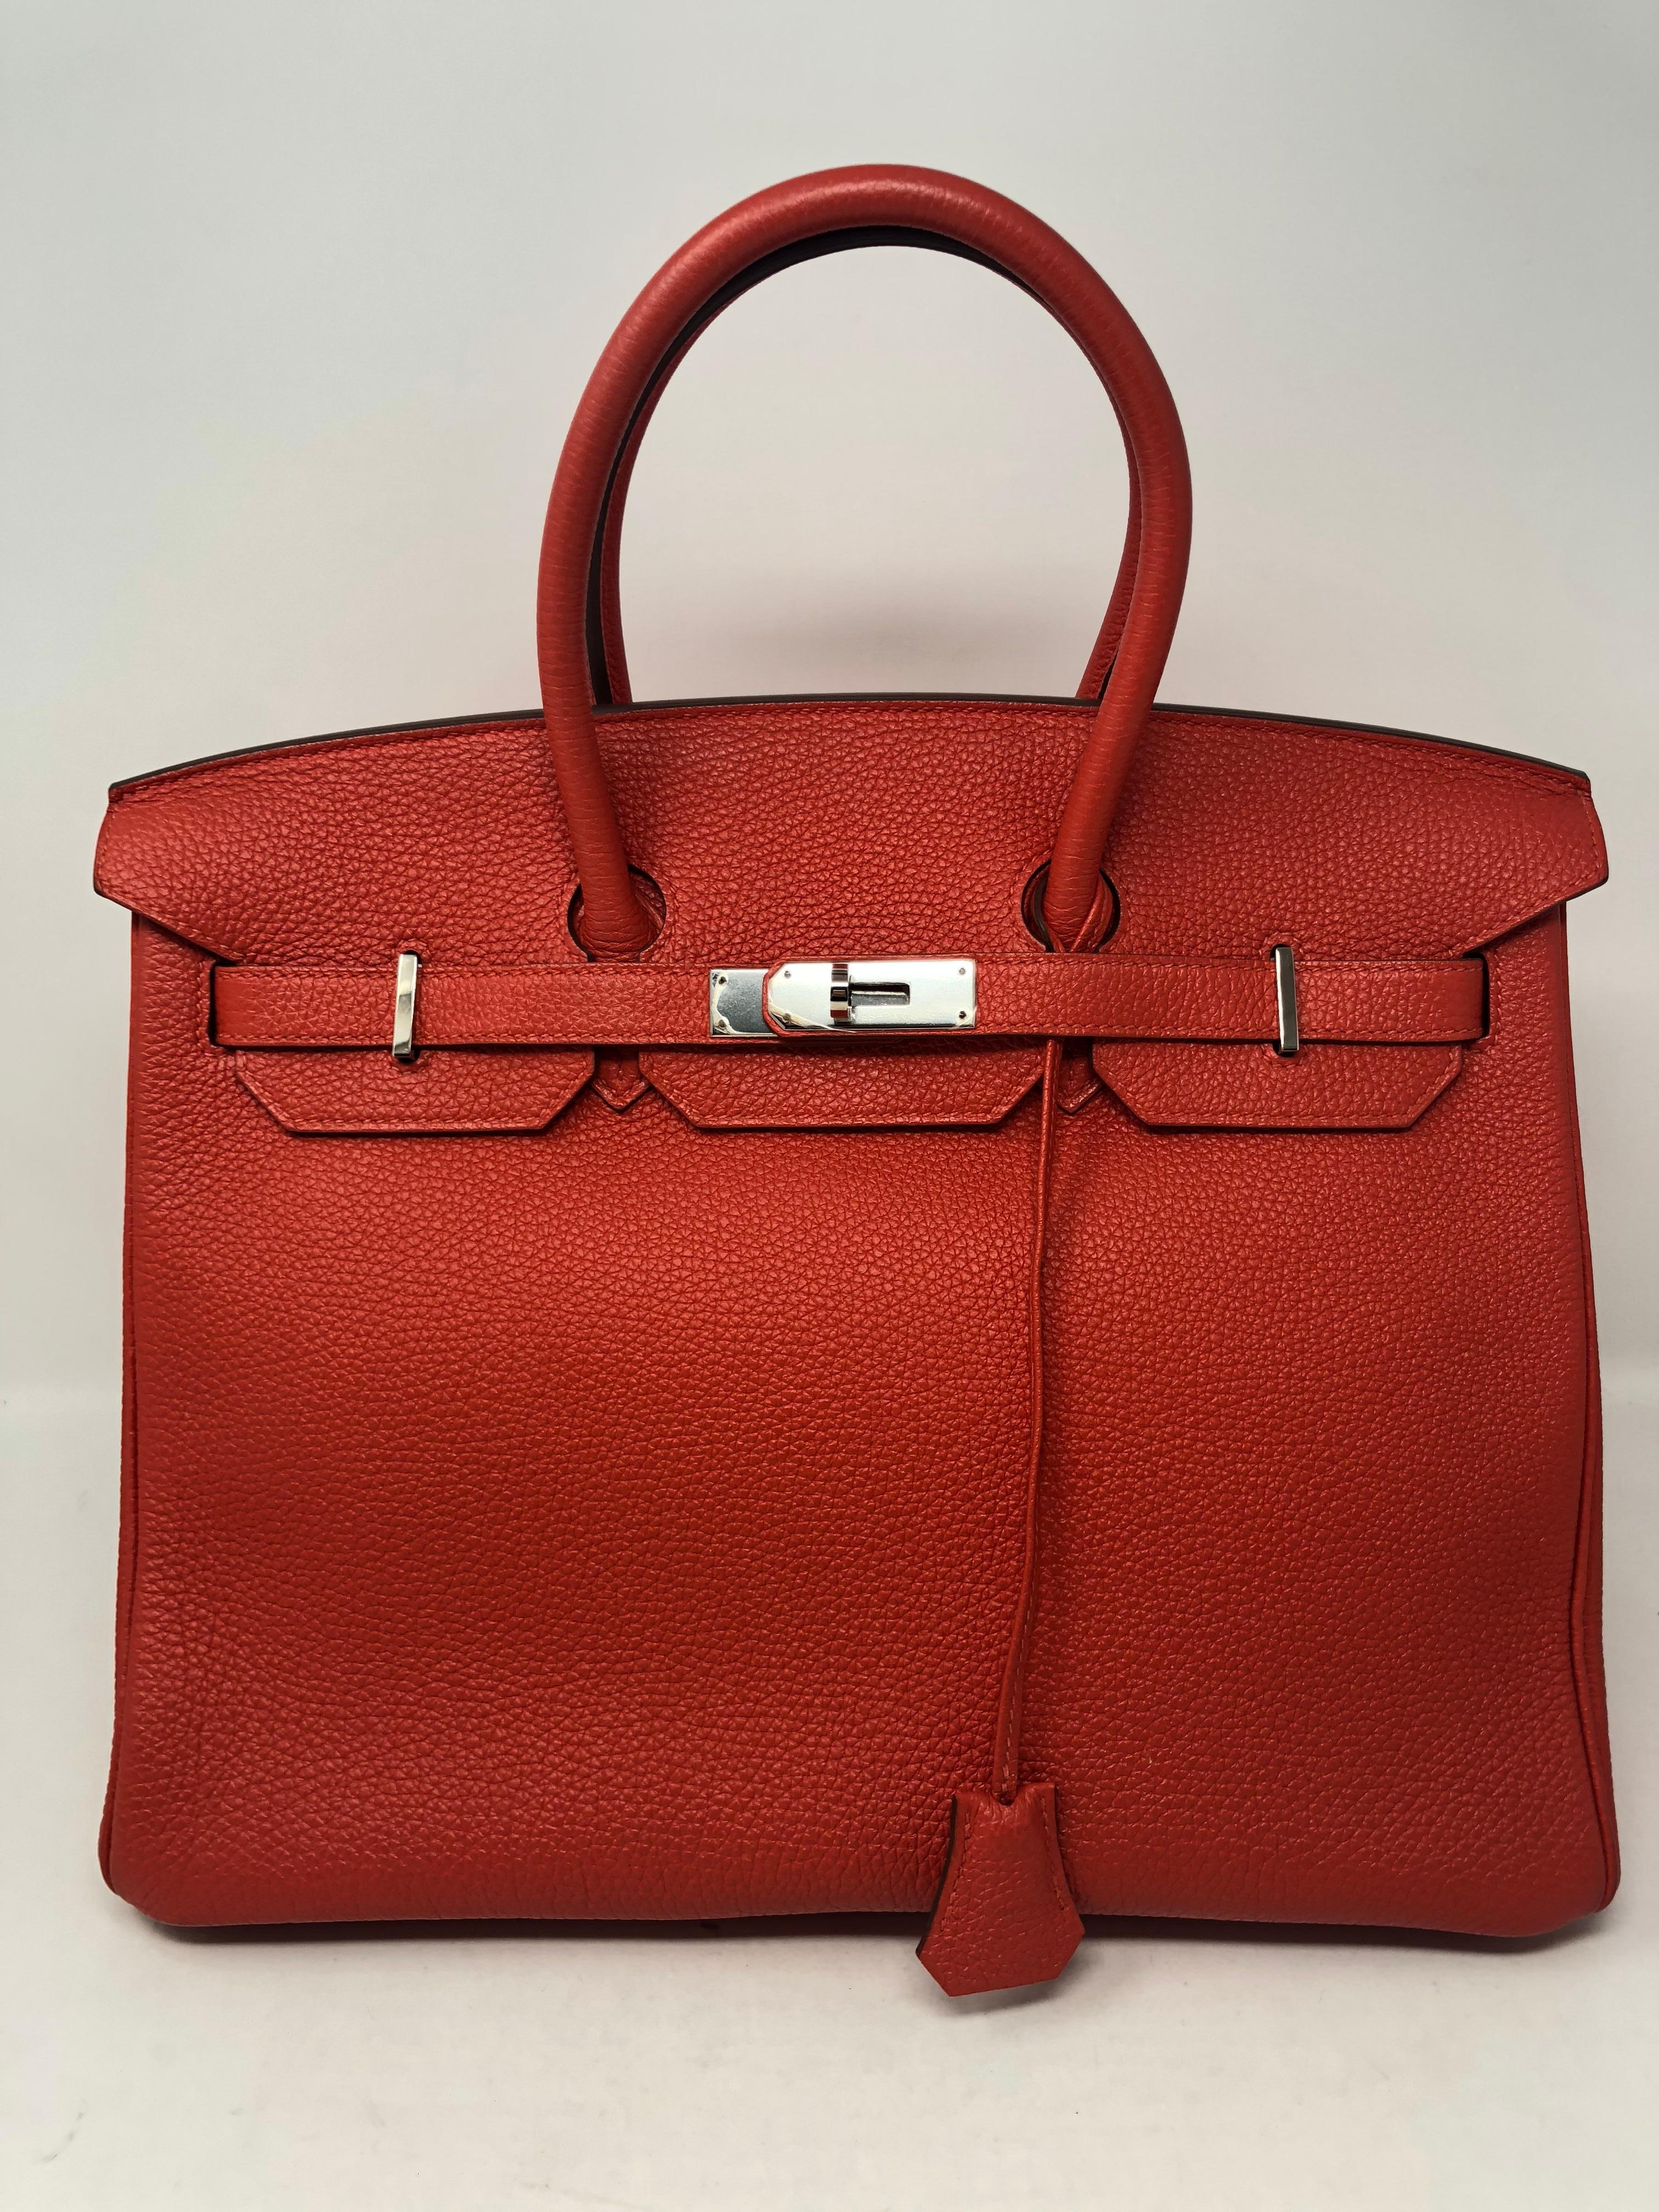 Hermes Birkin 35 in Cappucine Red color. Looks brand new condition. Beautiful color and nice togo leather. Palladium hardware. Includes dust cover, clochette, lock and keys. Guaranteed authentic. 